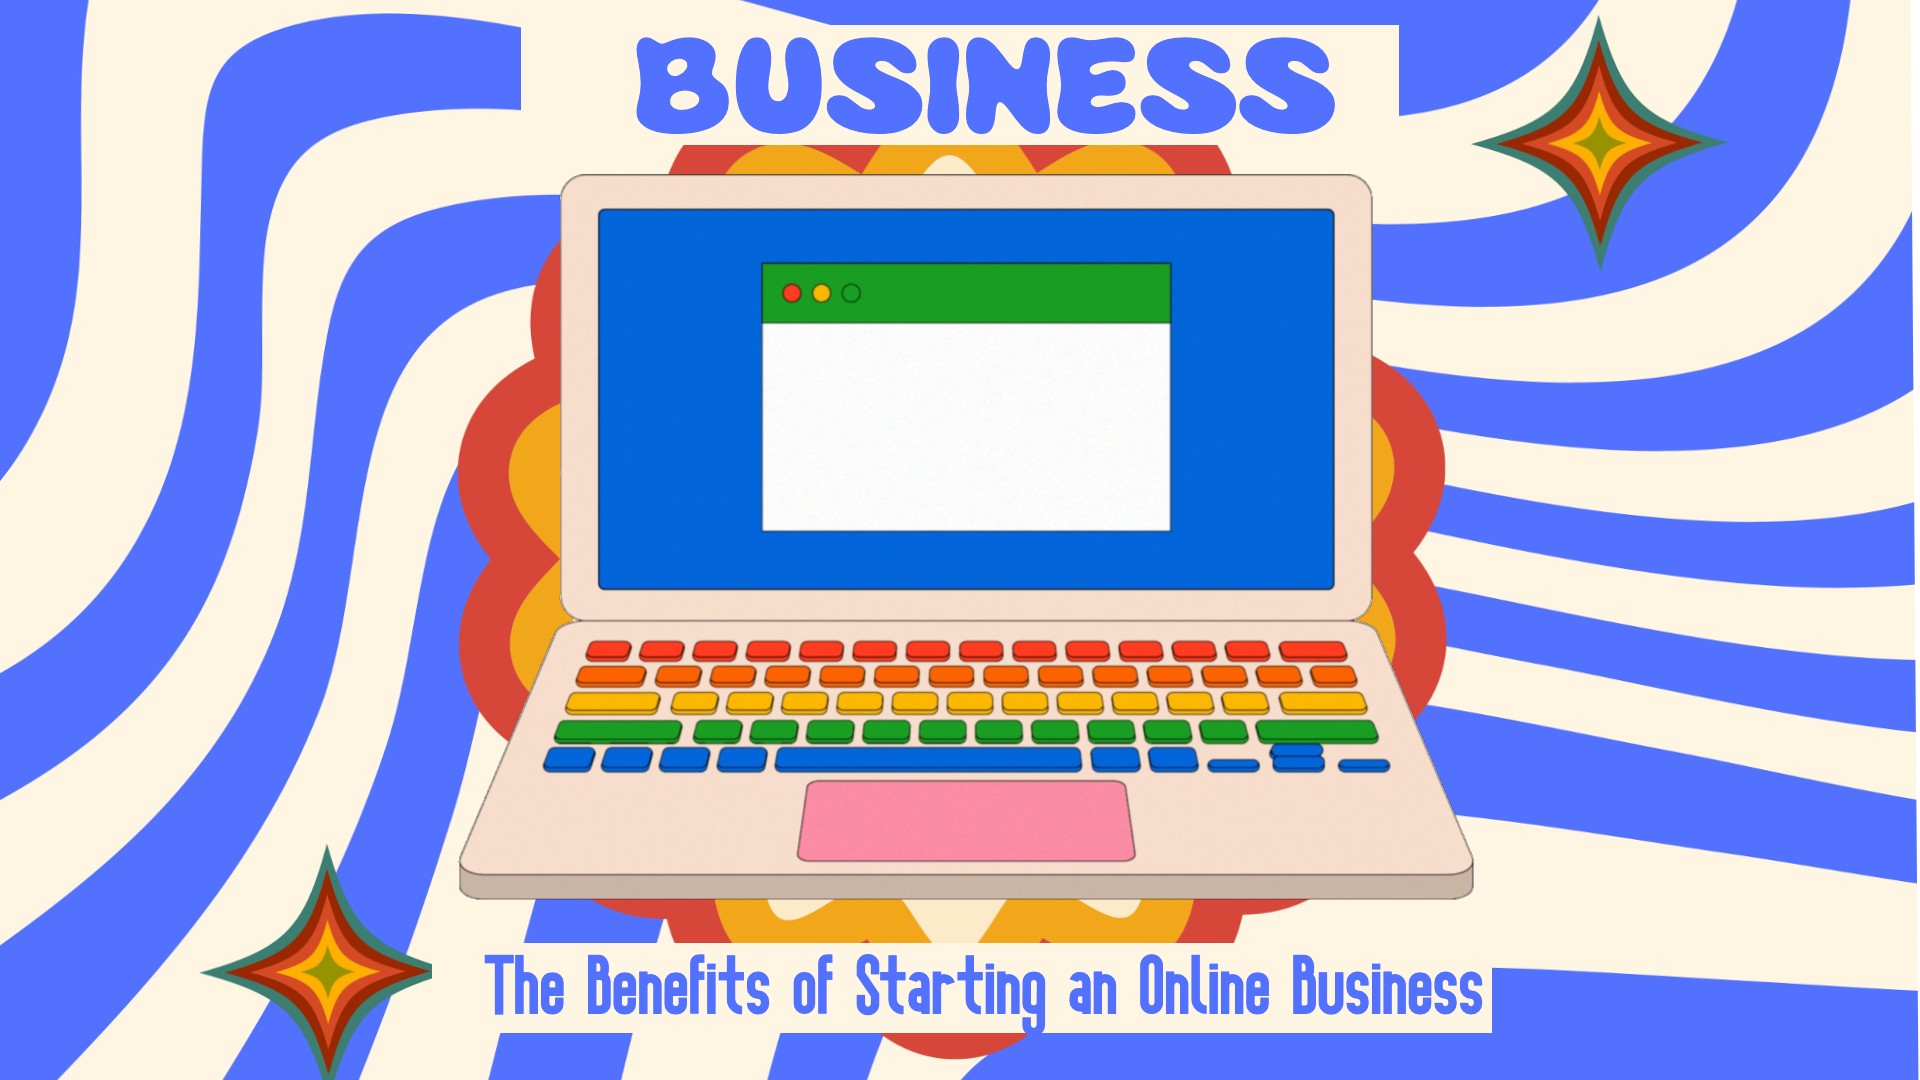 The Benefits of Starting an Online Business